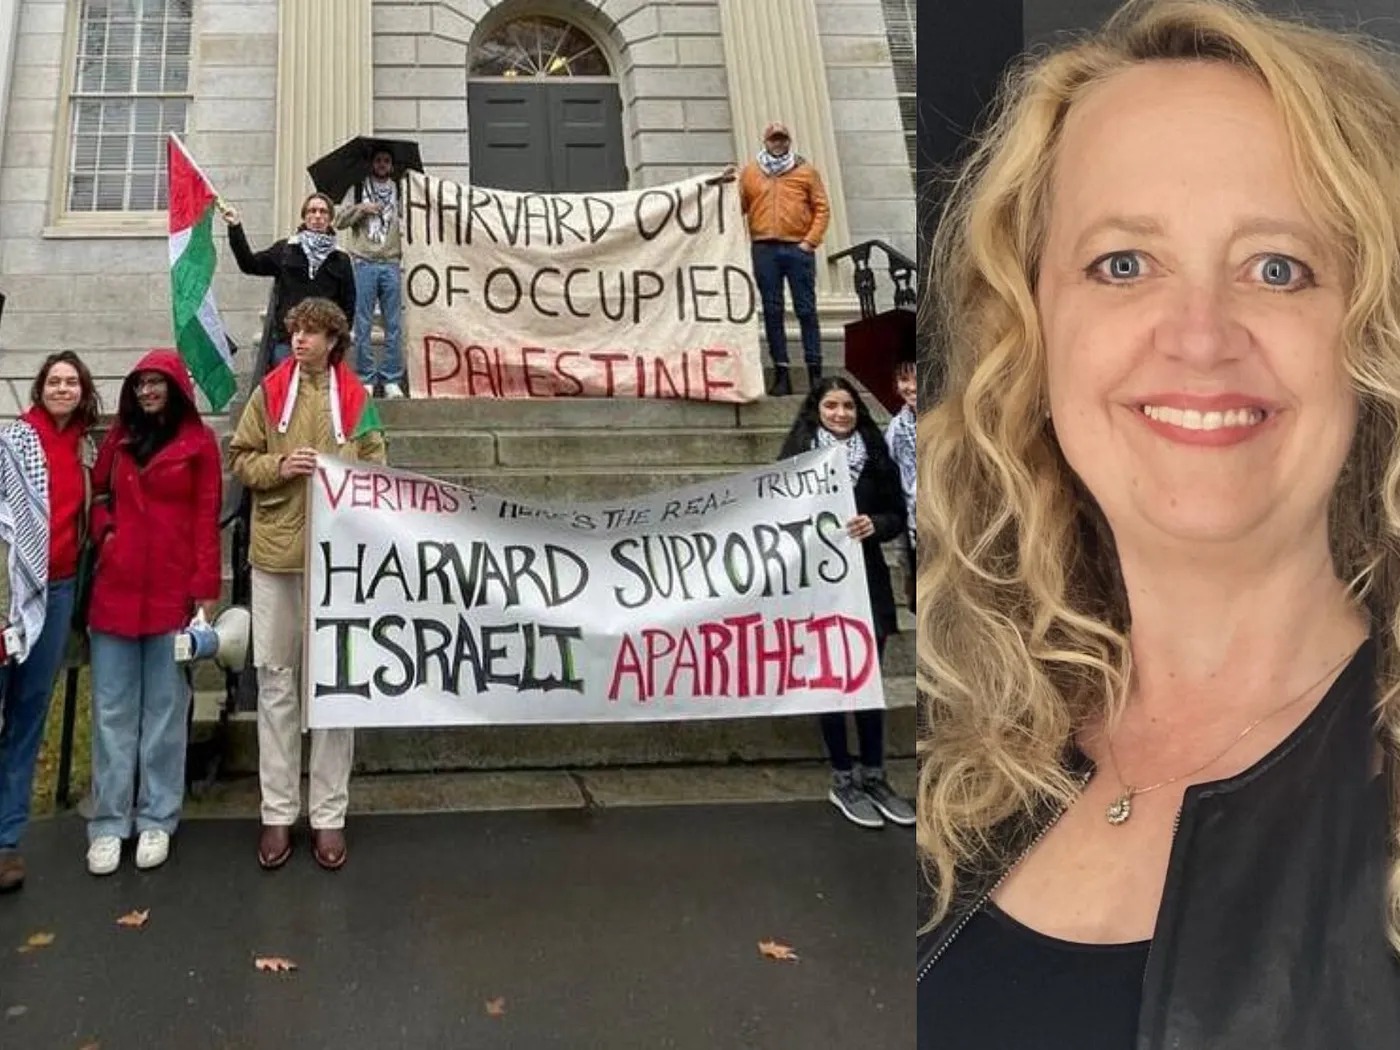 Muslim Civil Rights Org MLFA Who Filed Complaint Against Harvard Says Muslim and Palestinian Students’ Right to Protest Must Be Protected